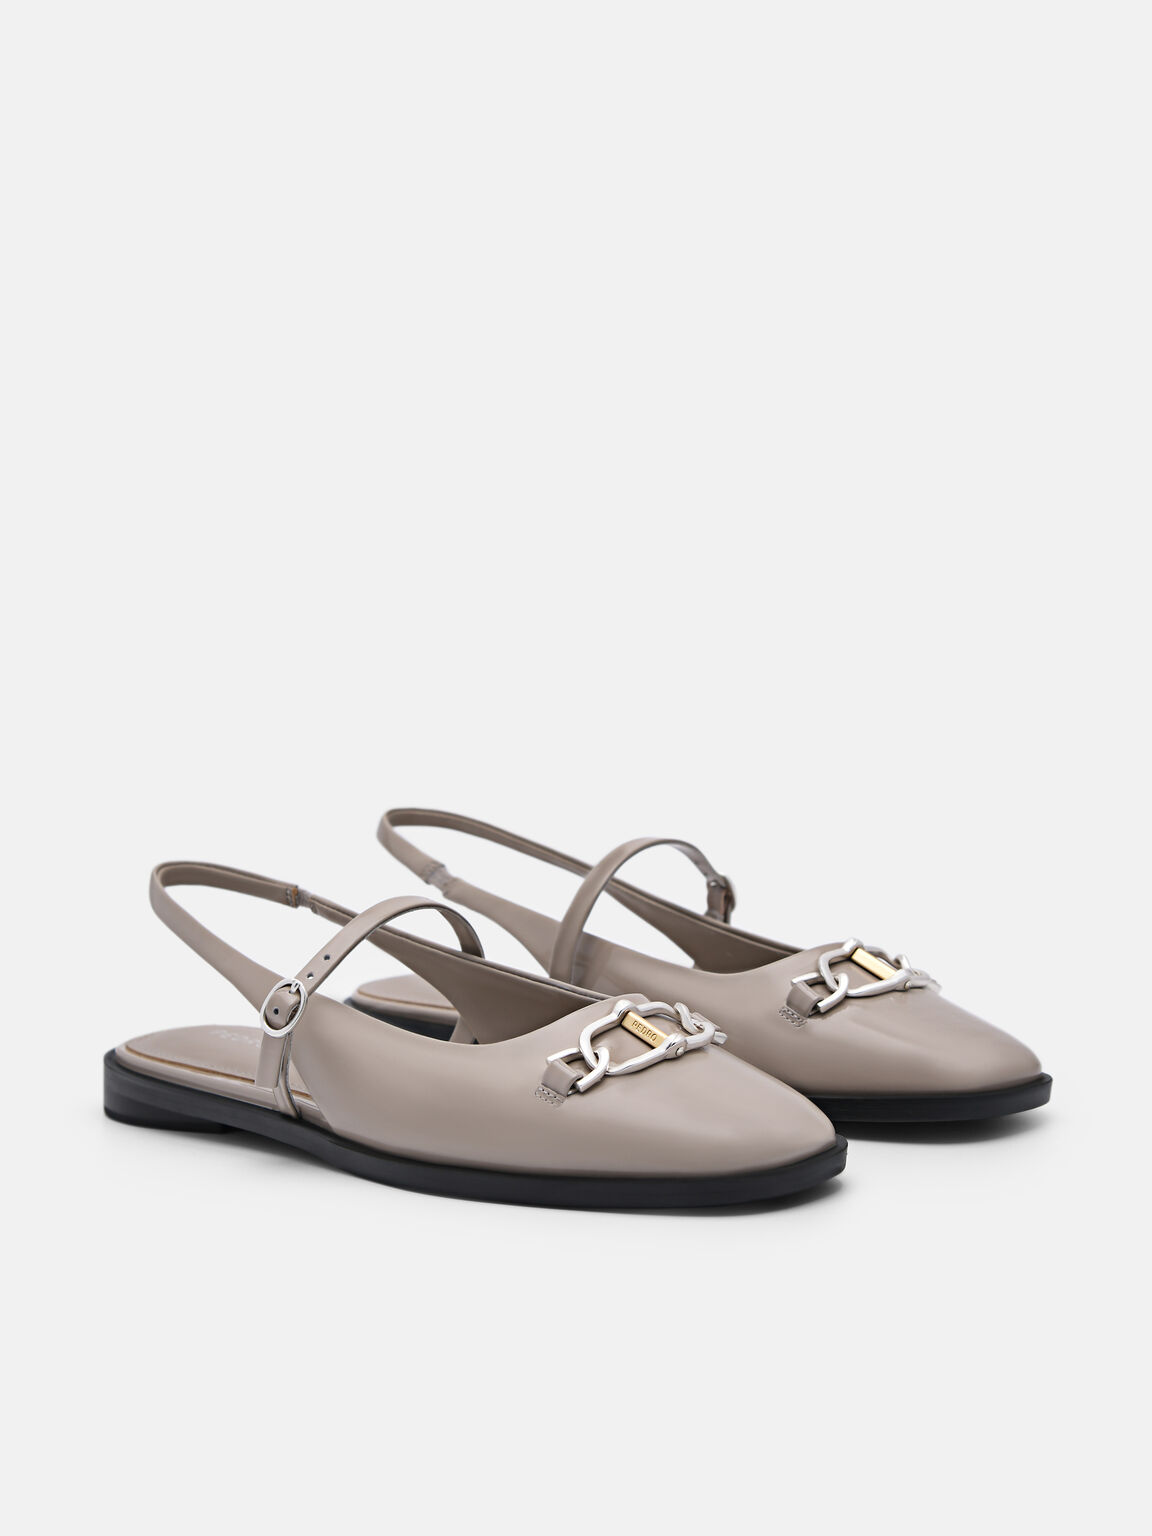 Jean Leather Slingback Sandals, Taupe